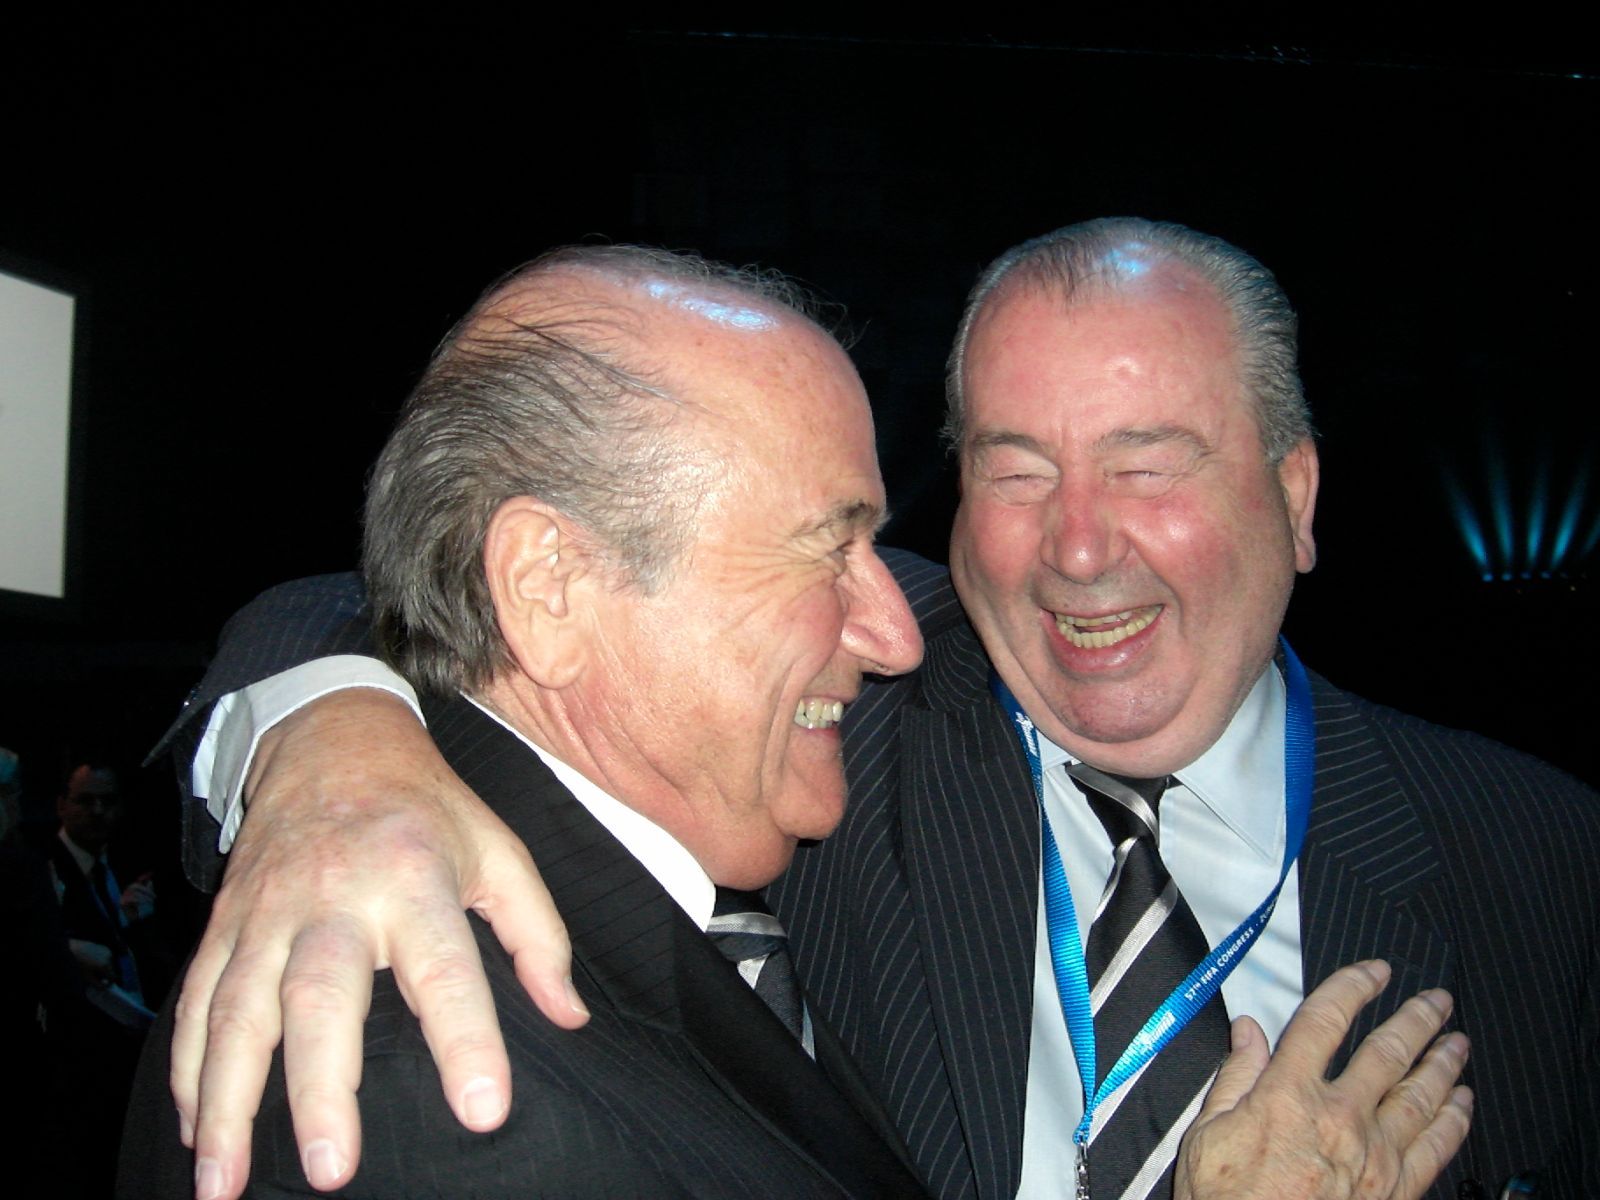 One of those snapshots we loved so much: Blatter and Don Julio Grondona. (Photo: Jens Weinreich)